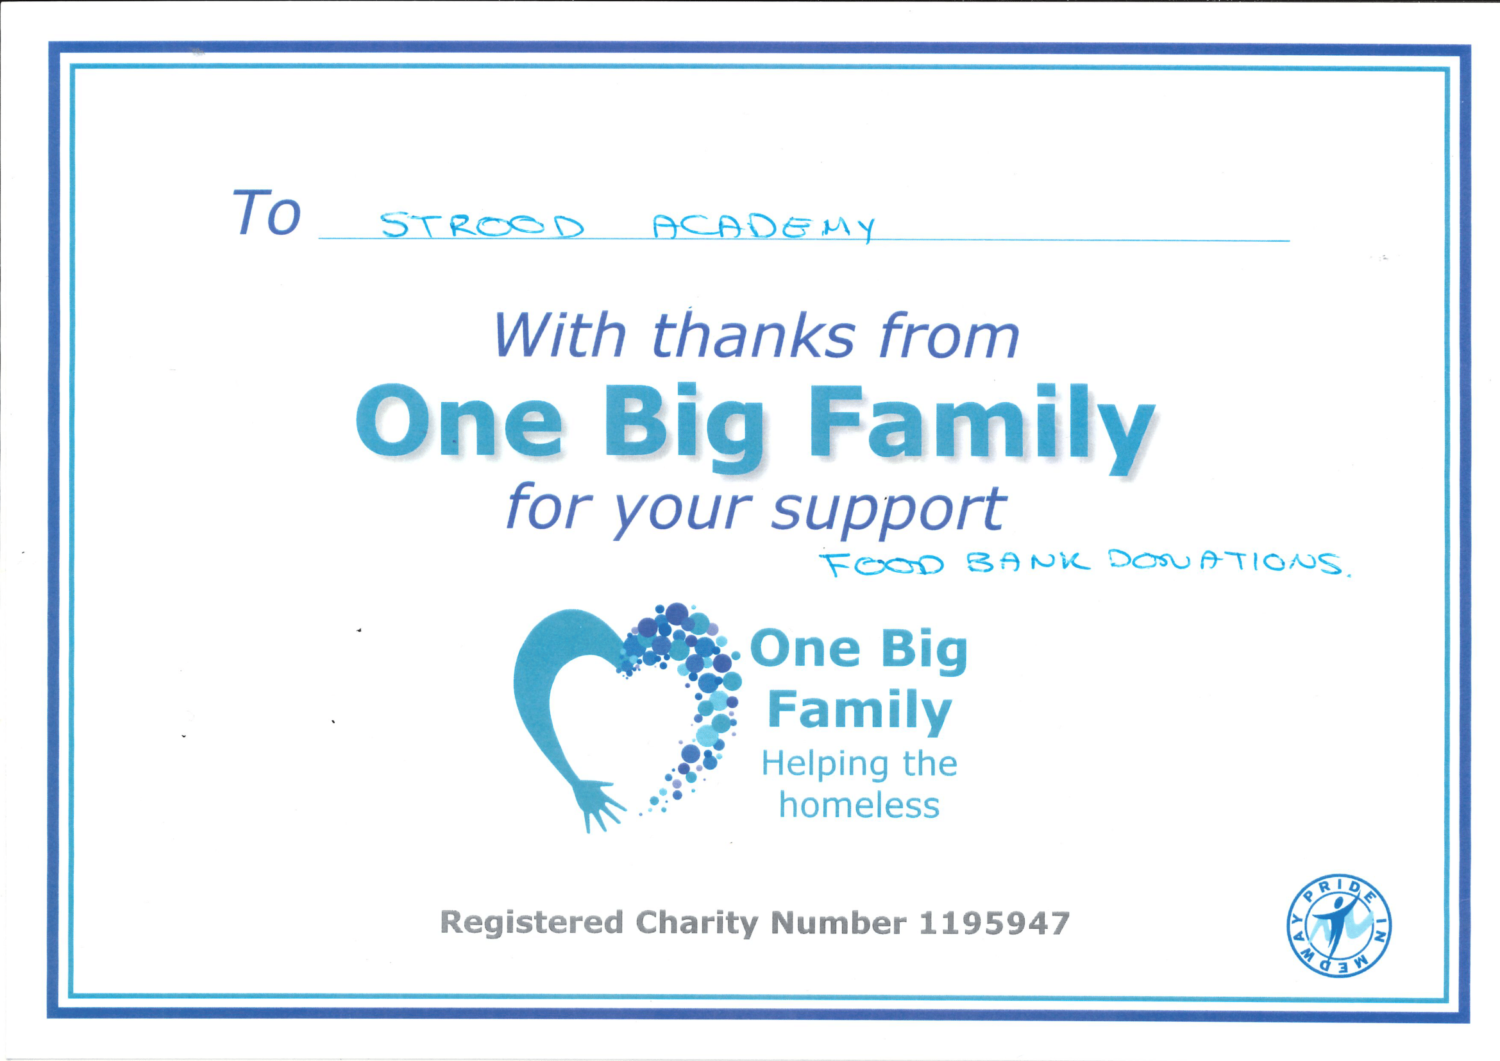 Thank you certificate presented to Strood Academy by One Big Family Food Bank.